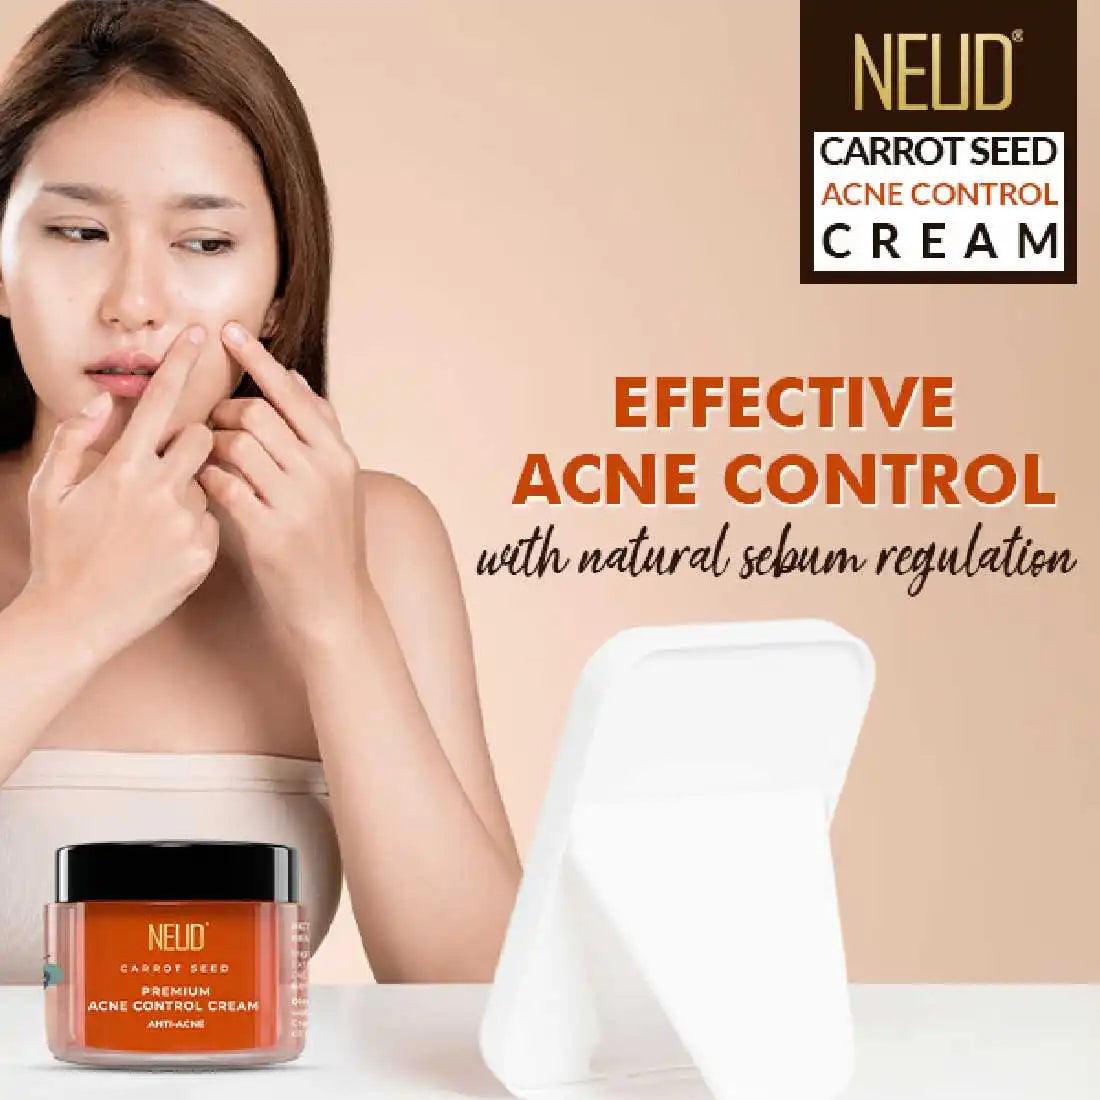 NEUD Carrot Seed Acne Control Cream Gives Effective Acne Control With Natural Sebum Regulation - everteen-neud.com